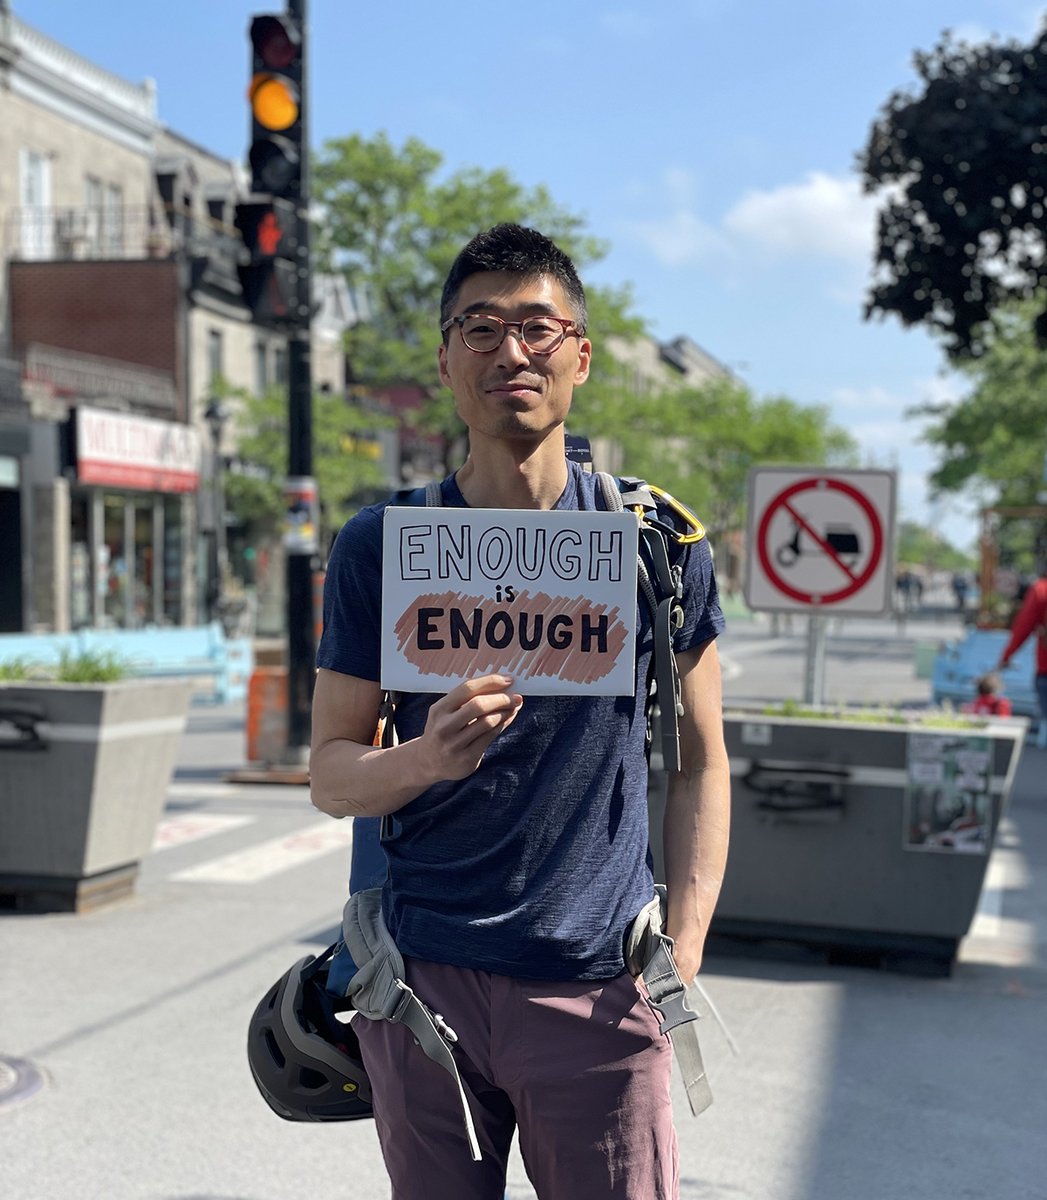 Everyone living in Ontario deserves access to health care and decent work. No exceptions. No privatization.
Today, I'm saying #EnoughIsEnough.

#EnoughIsEnoughON